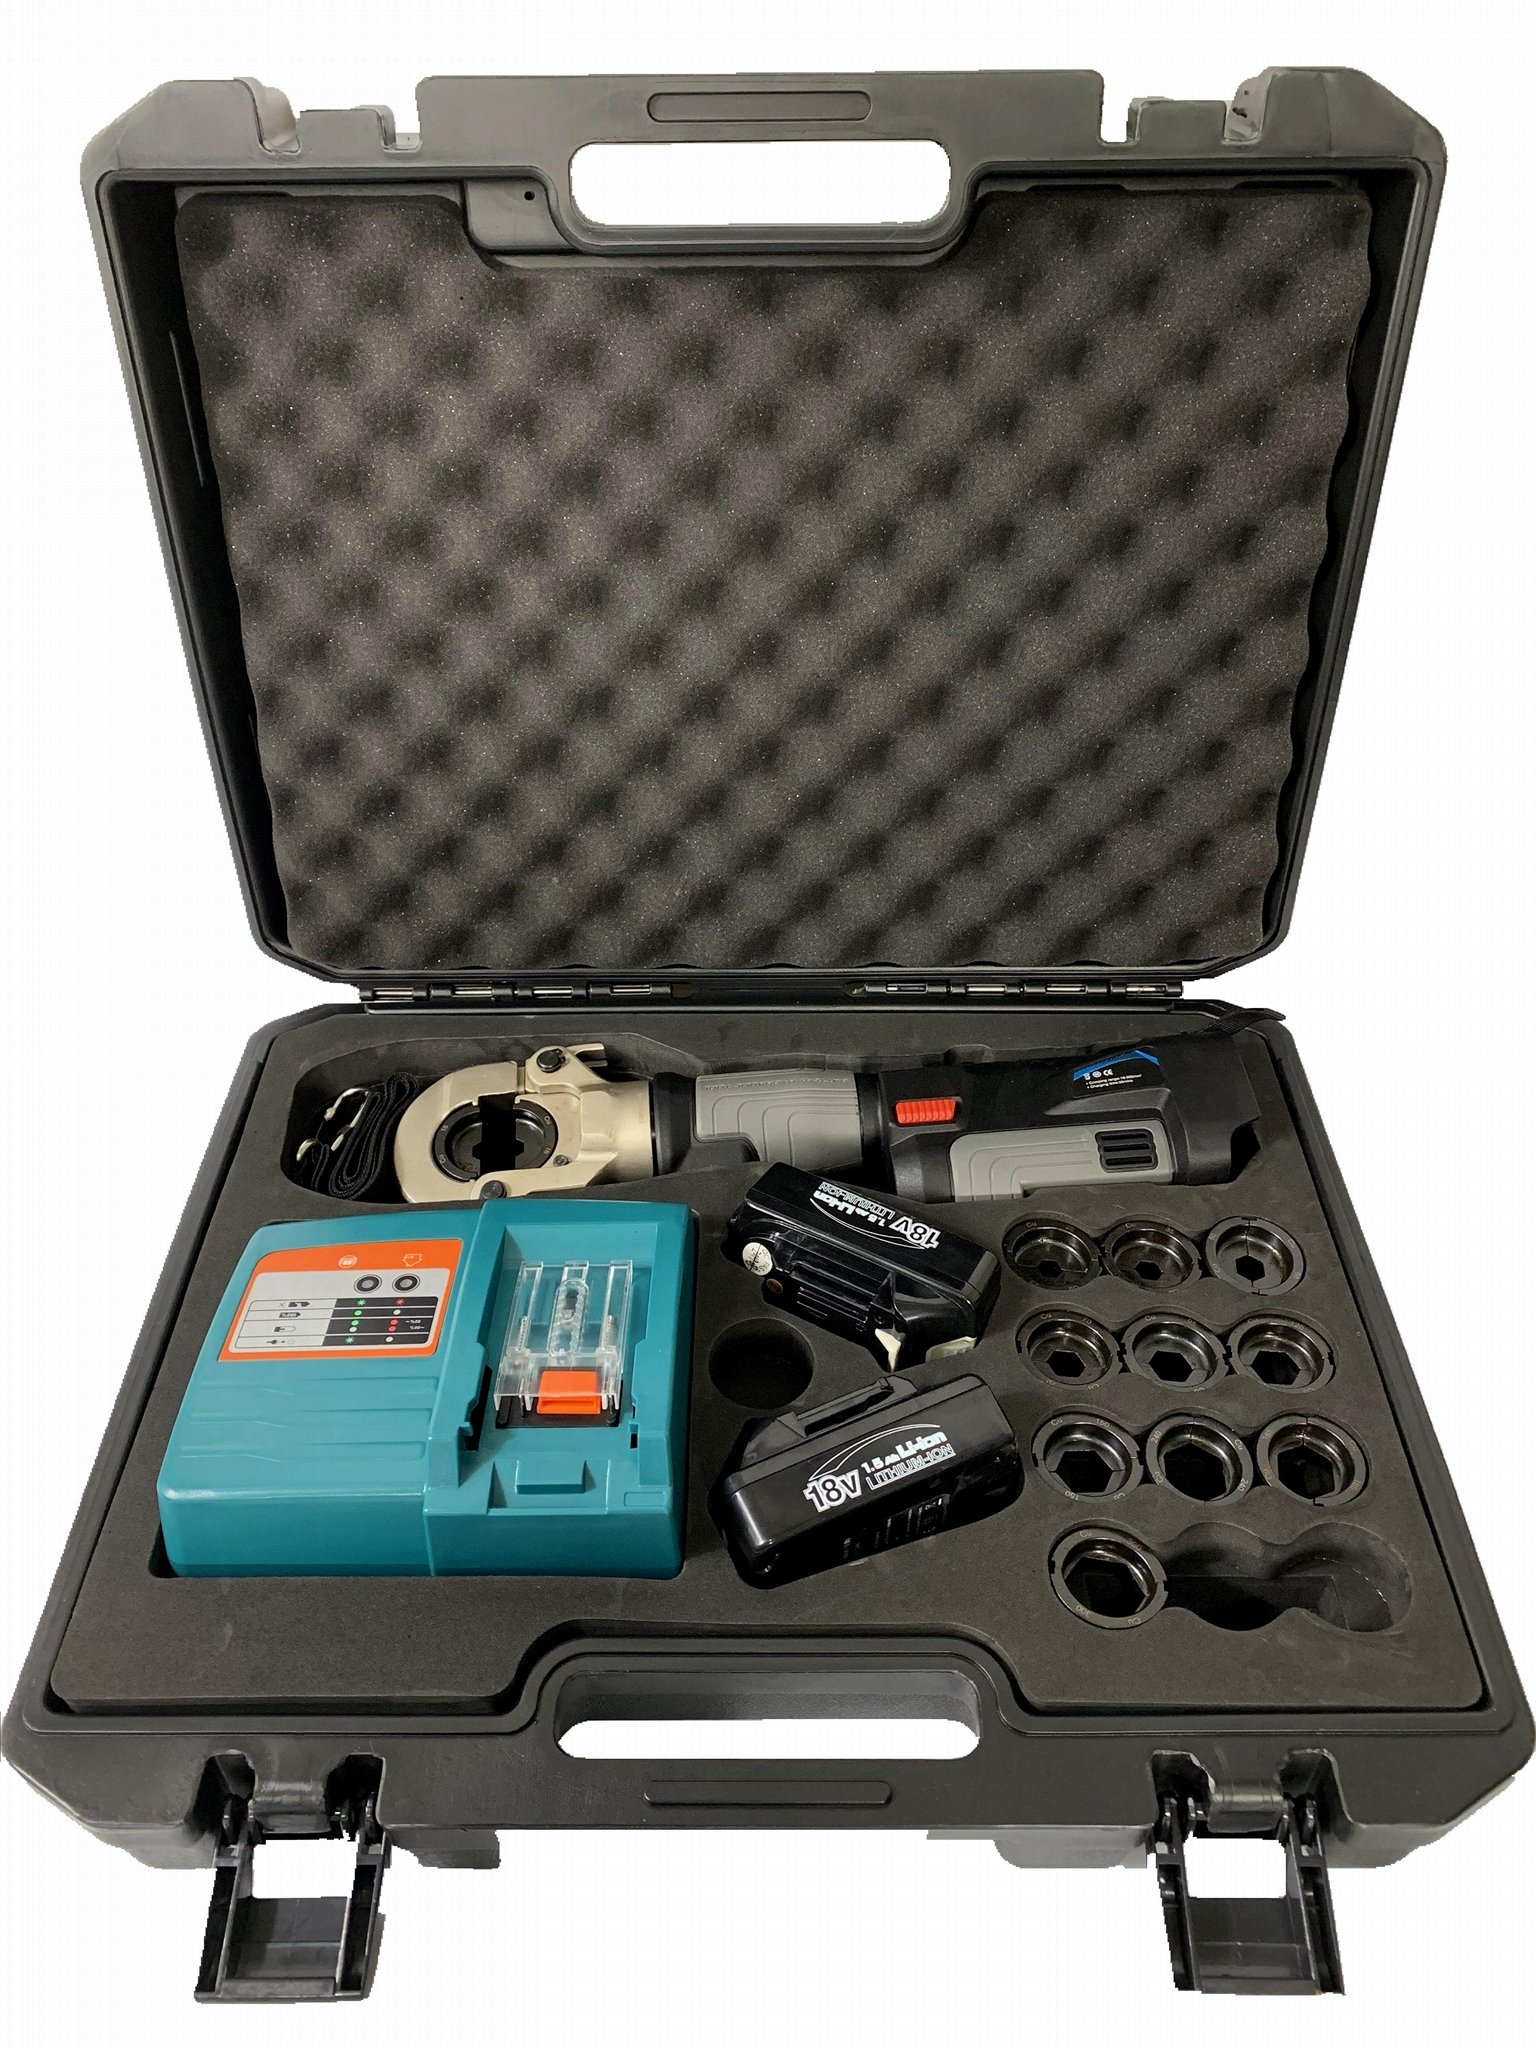 PZ-1930 Mini Pex Pressing Tools with Changeable Dies for Copper, Stainless Pipe  1